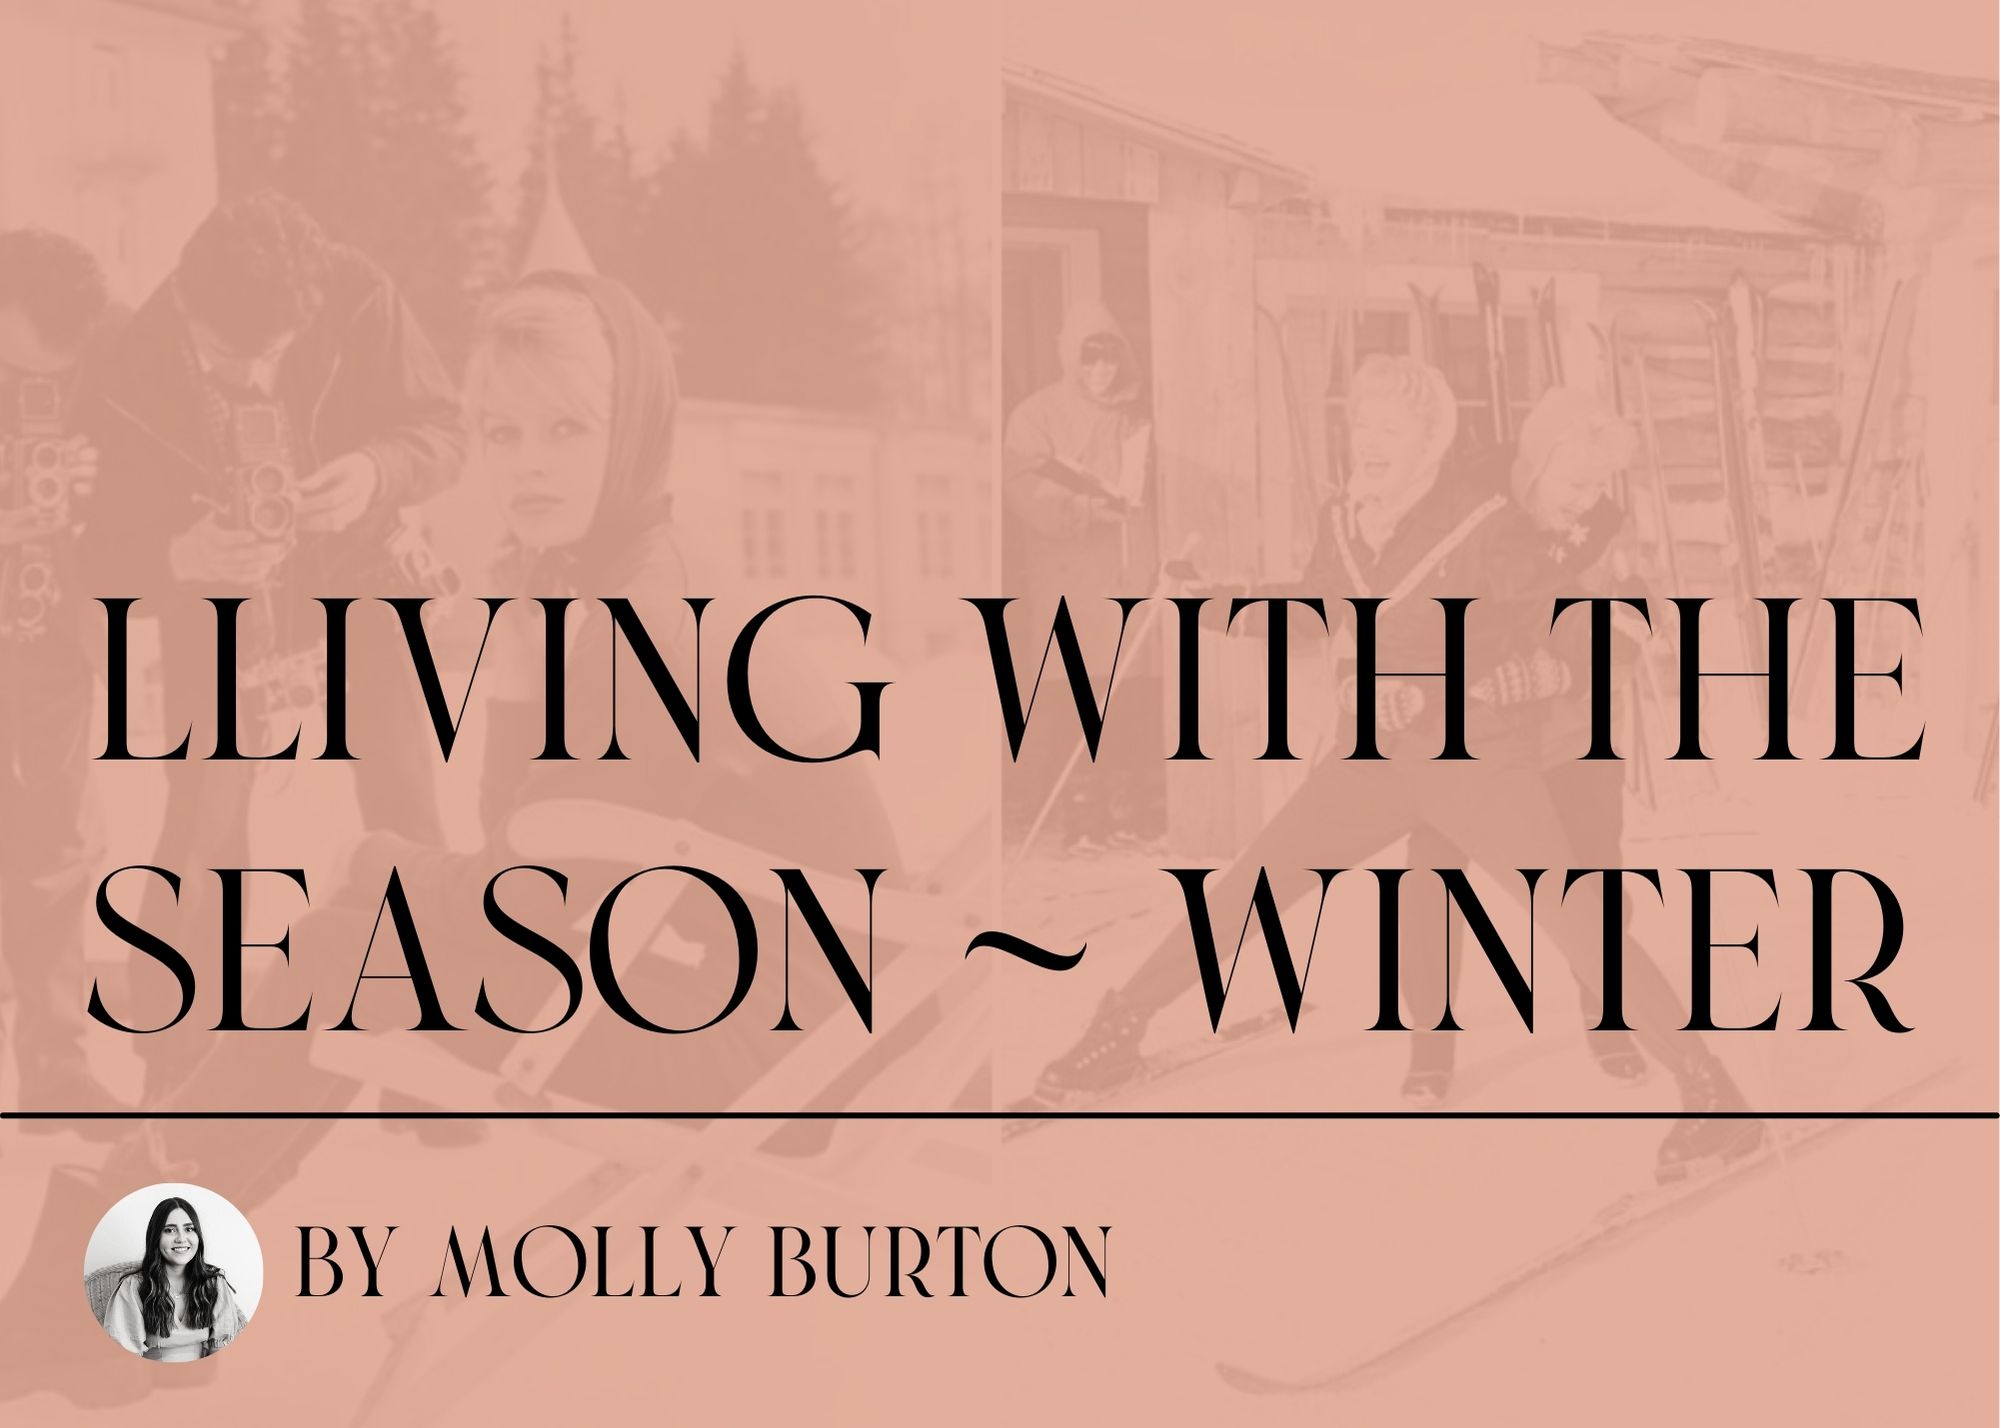 Living with the seasons of Winter